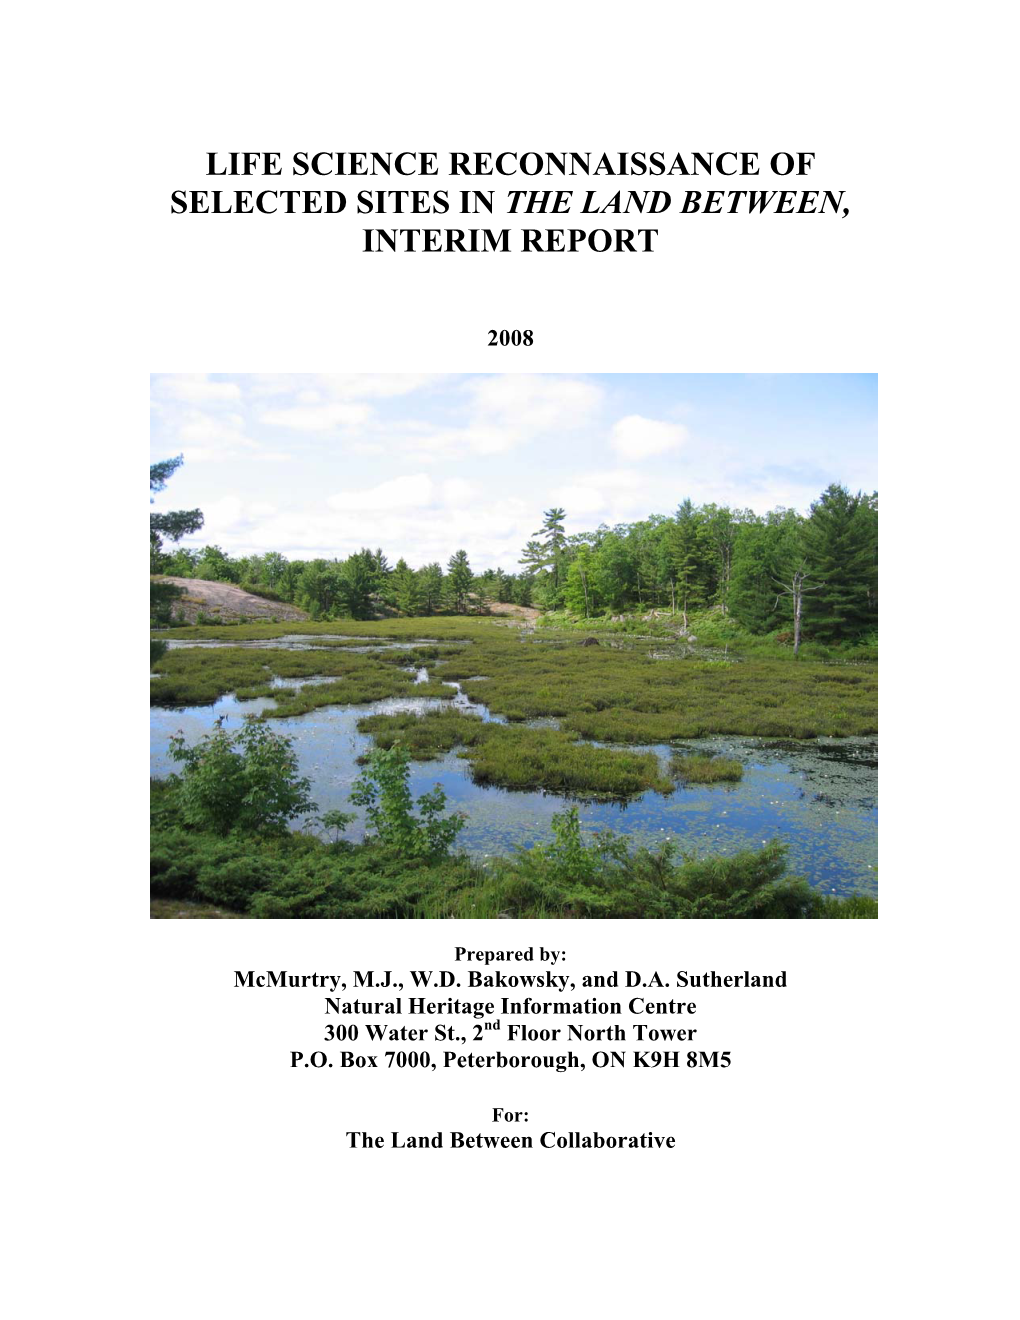 Life Science Reconnaissance of Selected Sites in the Land Between, Interim Report